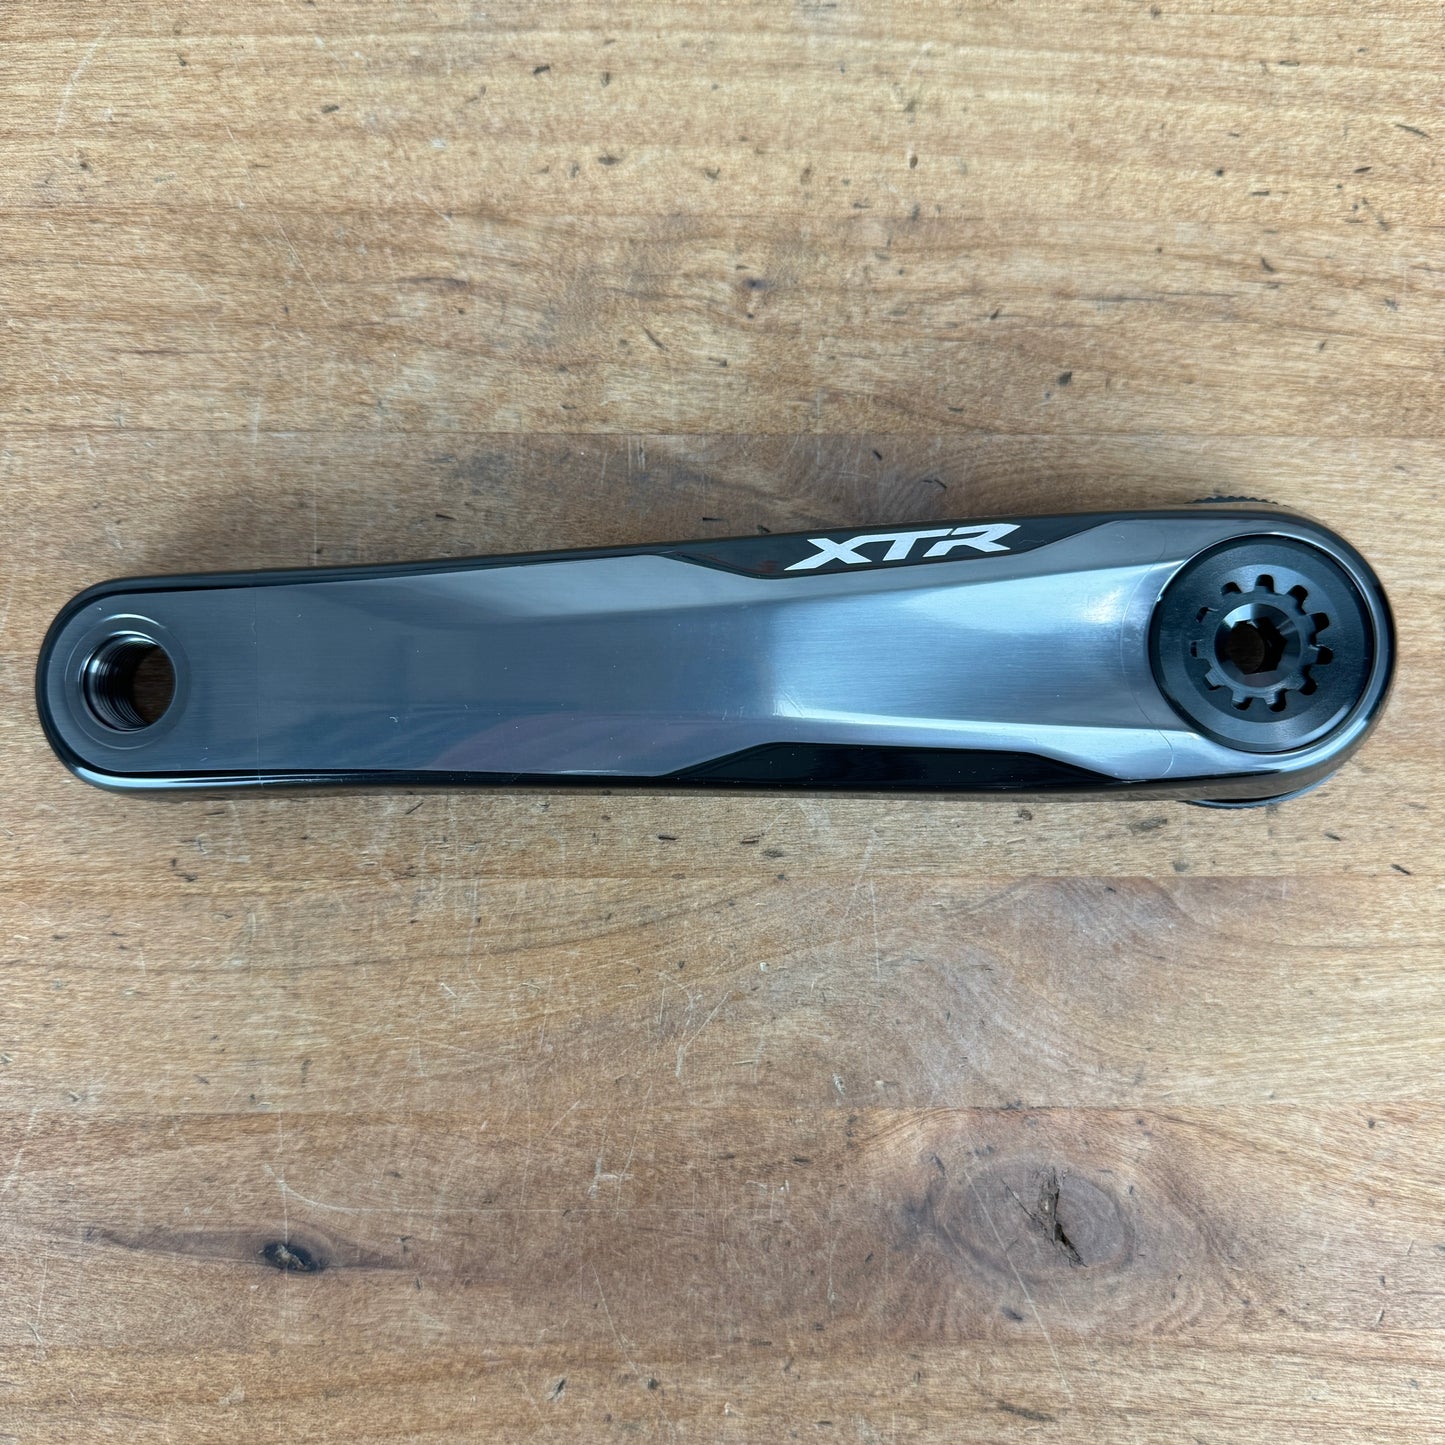 New Takeoff! Shimano XTR-M9120 170mm Direct Mount Left Side Only MTB Crank Arm